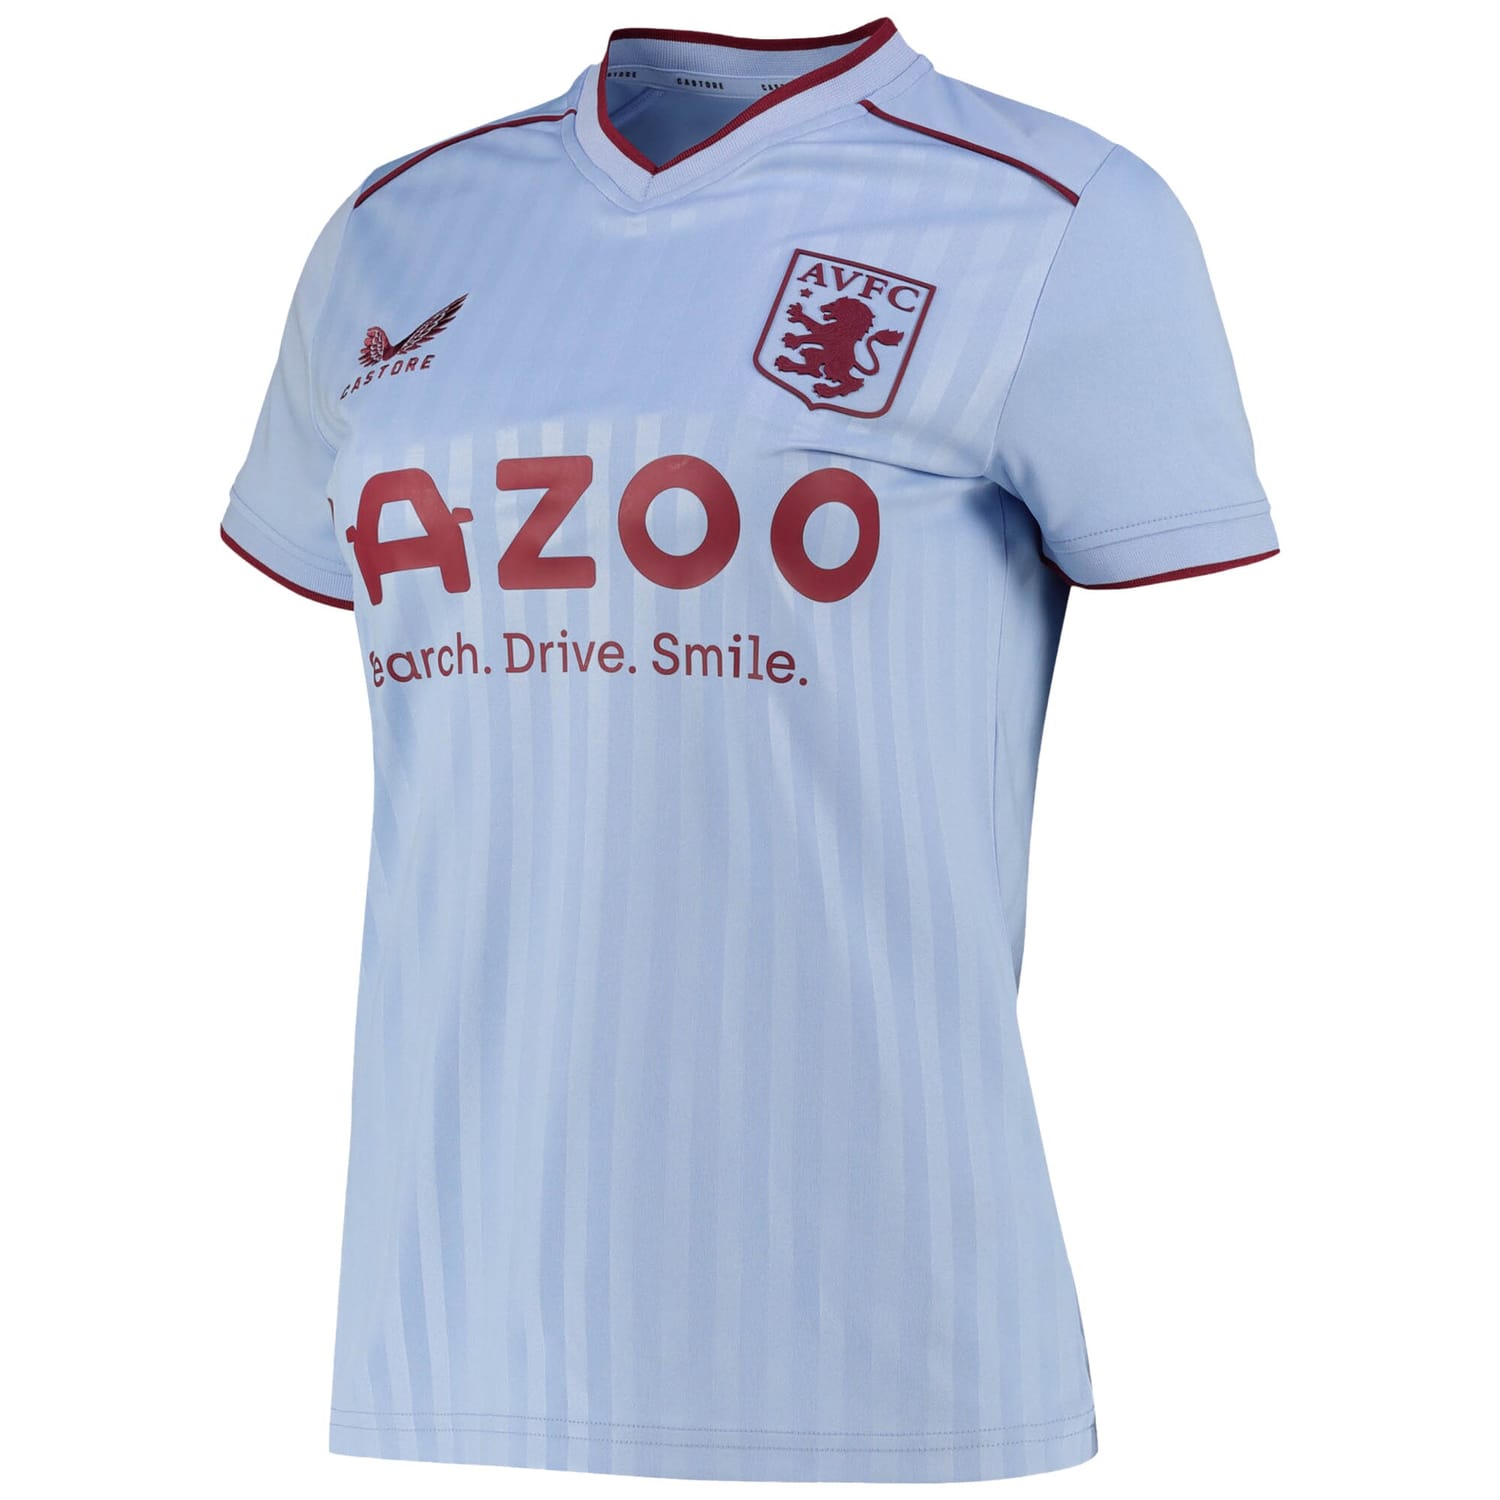 Premier League Ast. Villa Away Jersey Shirt 2022-23 player Philippe Coutinho 23 printing for Women